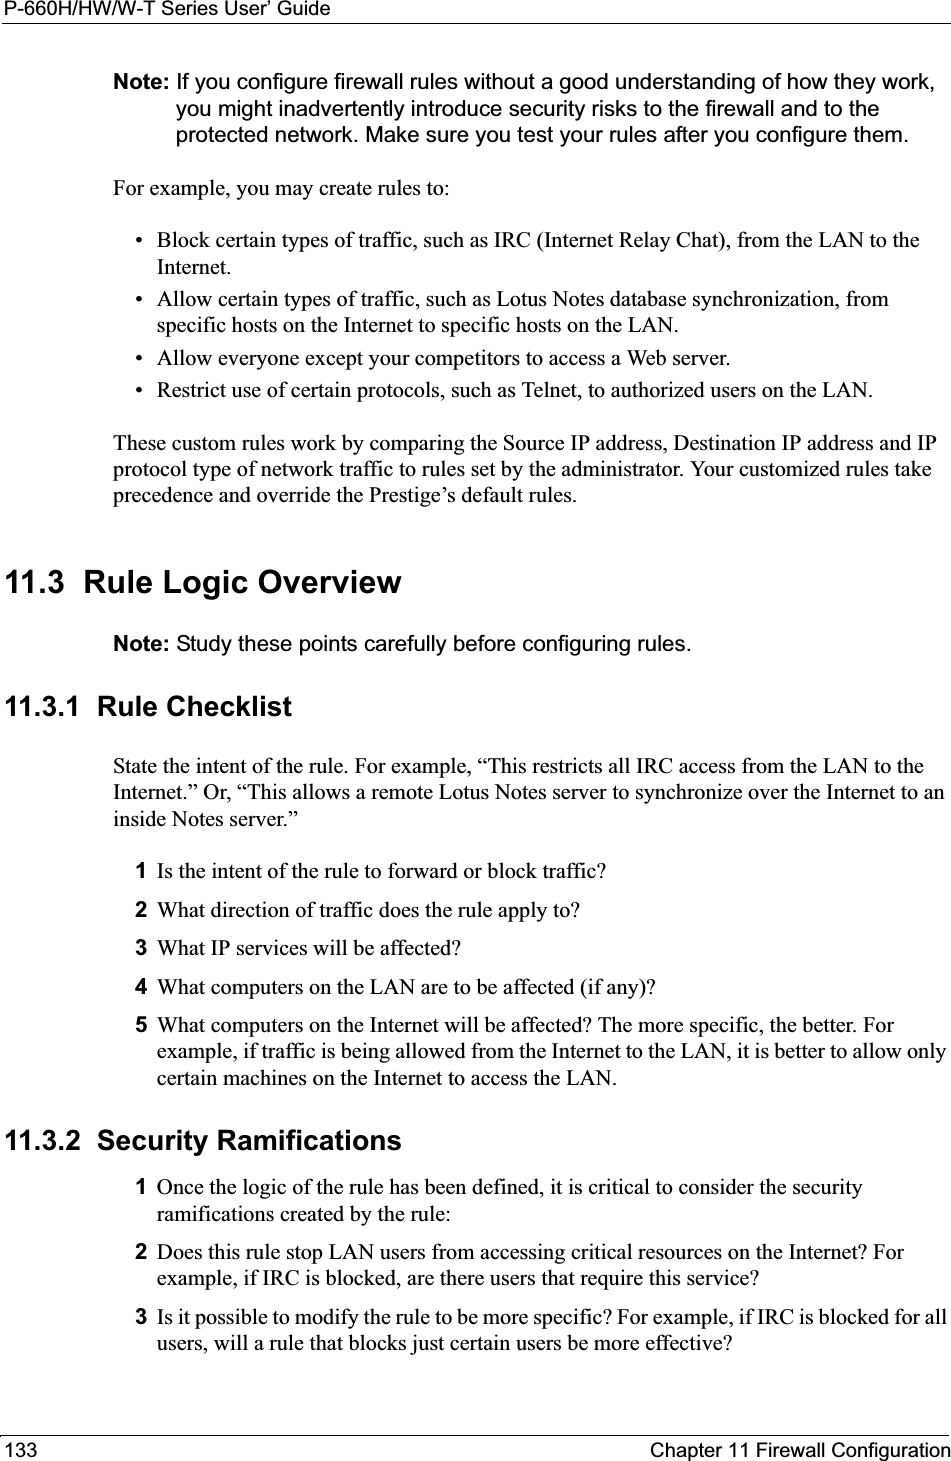 P-660H/HW/W-T Series User’ Guide133 Chapter 11 Firewall ConfigurationNote: If you configure firewall rules without a good understanding of how they work, you might inadvertently introduce security risks to the firewall and to the protected network. Make sure you test your rules after you configure them.For example, you may create rules to:• Block certain types of traffic, such as IRC (Internet Relay Chat), from the LAN to the Internet.• Allow certain types of traffic, such as Lotus Notes database synchronization, from specific hosts on the Internet to specific hosts on the LAN.• Allow everyone except your competitors to access a Web server.• Restrict use of certain protocols, such as Telnet, to authorized users on the LAN.These custom rules work by comparing the Source IP address, Destination IP address and IP protocol type of network traffic to rules set by the administrator. Your customized rules take precedence and override the Prestige’s default rules. 11.3  Rule Logic Overview  Note: Study these points carefully before configuring rules.11.3.1  Rule ChecklistState the intent of the rule. For example, “This restricts all IRC access from the LAN to the Internet.” Or, “This allows a remote Lotus Notes server to synchronize over the Internet to an inside Notes server.”1Is the intent of the rule to forward or block traffic?2What direction of traffic does the rule apply to?3What IP services will be affected?4What computers on the LAN are to be affected (if any)?5What computers on the Internet will be affected? The more specific, the better. For example, if traffic is being allowed from the Internet to the LAN, it is better to allow only certain machines on the Internet to access the LAN.11.3.2  Security Ramifications1Once the logic of the rule has been defined, it is critical to consider the security ramifications created by the rule:2Does this rule stop LAN users from accessing critical resources on the Internet? For example, if IRC is blocked, are there users that require this service?3Is it possible to modify the rule to be more specific? For example, if IRC is blocked for all users, will a rule that blocks just certain users be more effective?